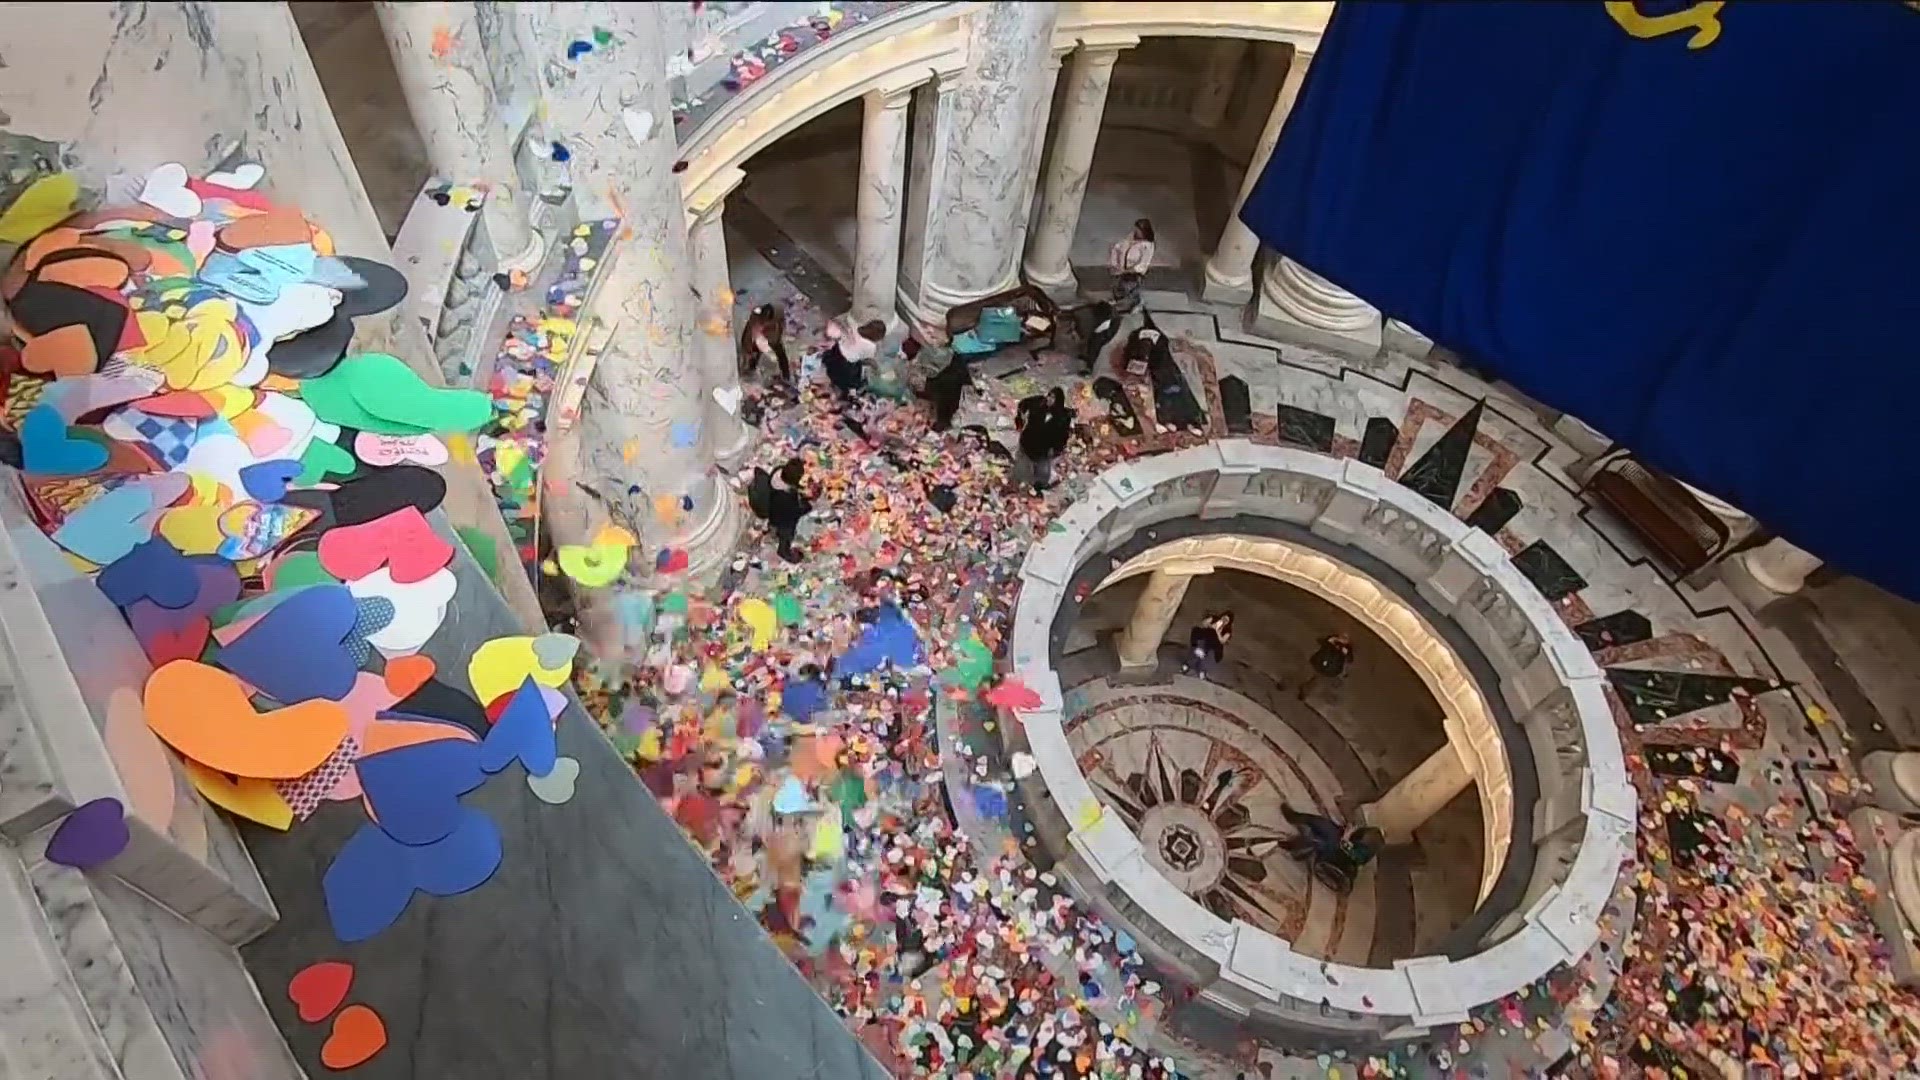 More than 48K paper hearts handmade by LGBTQ allies were dropped from the fourth floor of the rotunda at the Idaho State Capitol in protest of LGBTQ legislation.